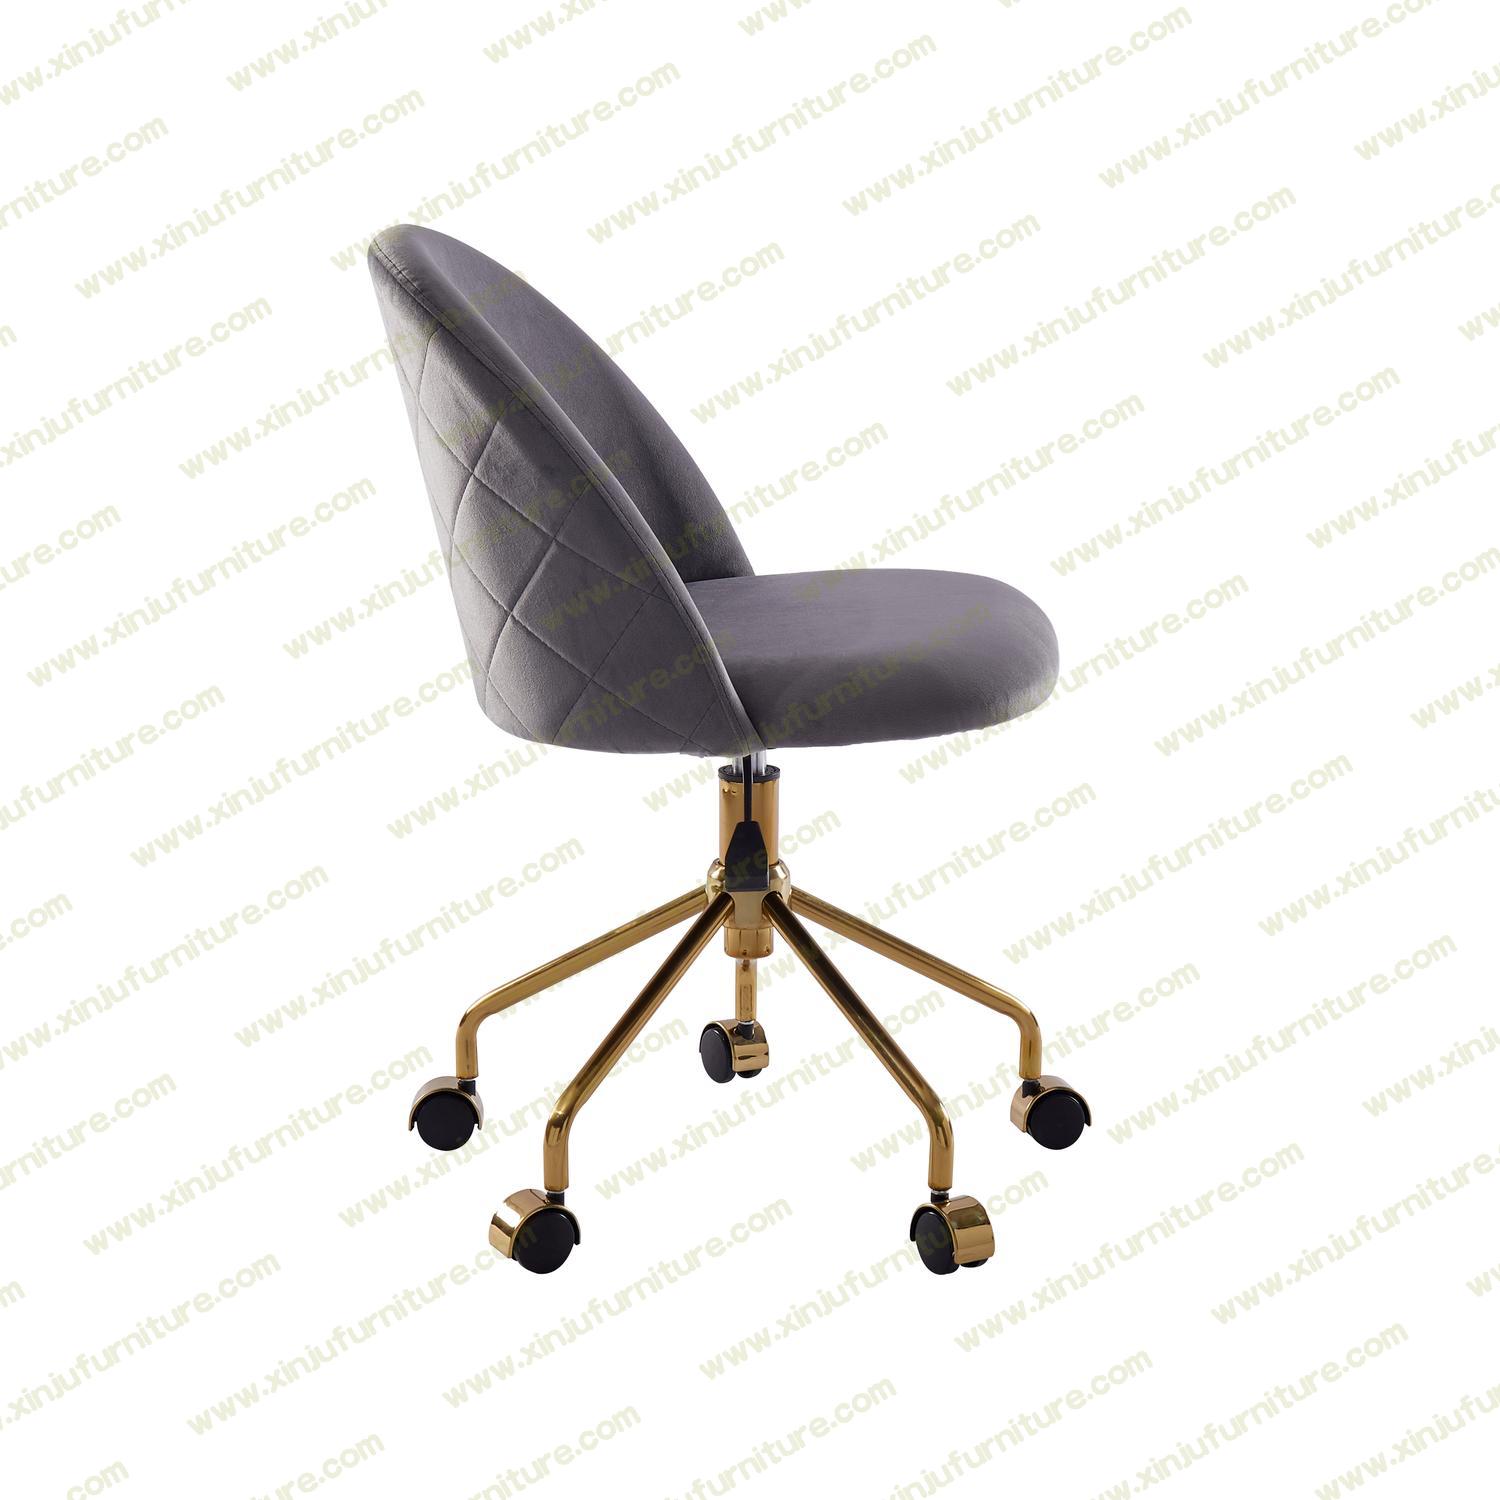 Simple movable tufted office chair